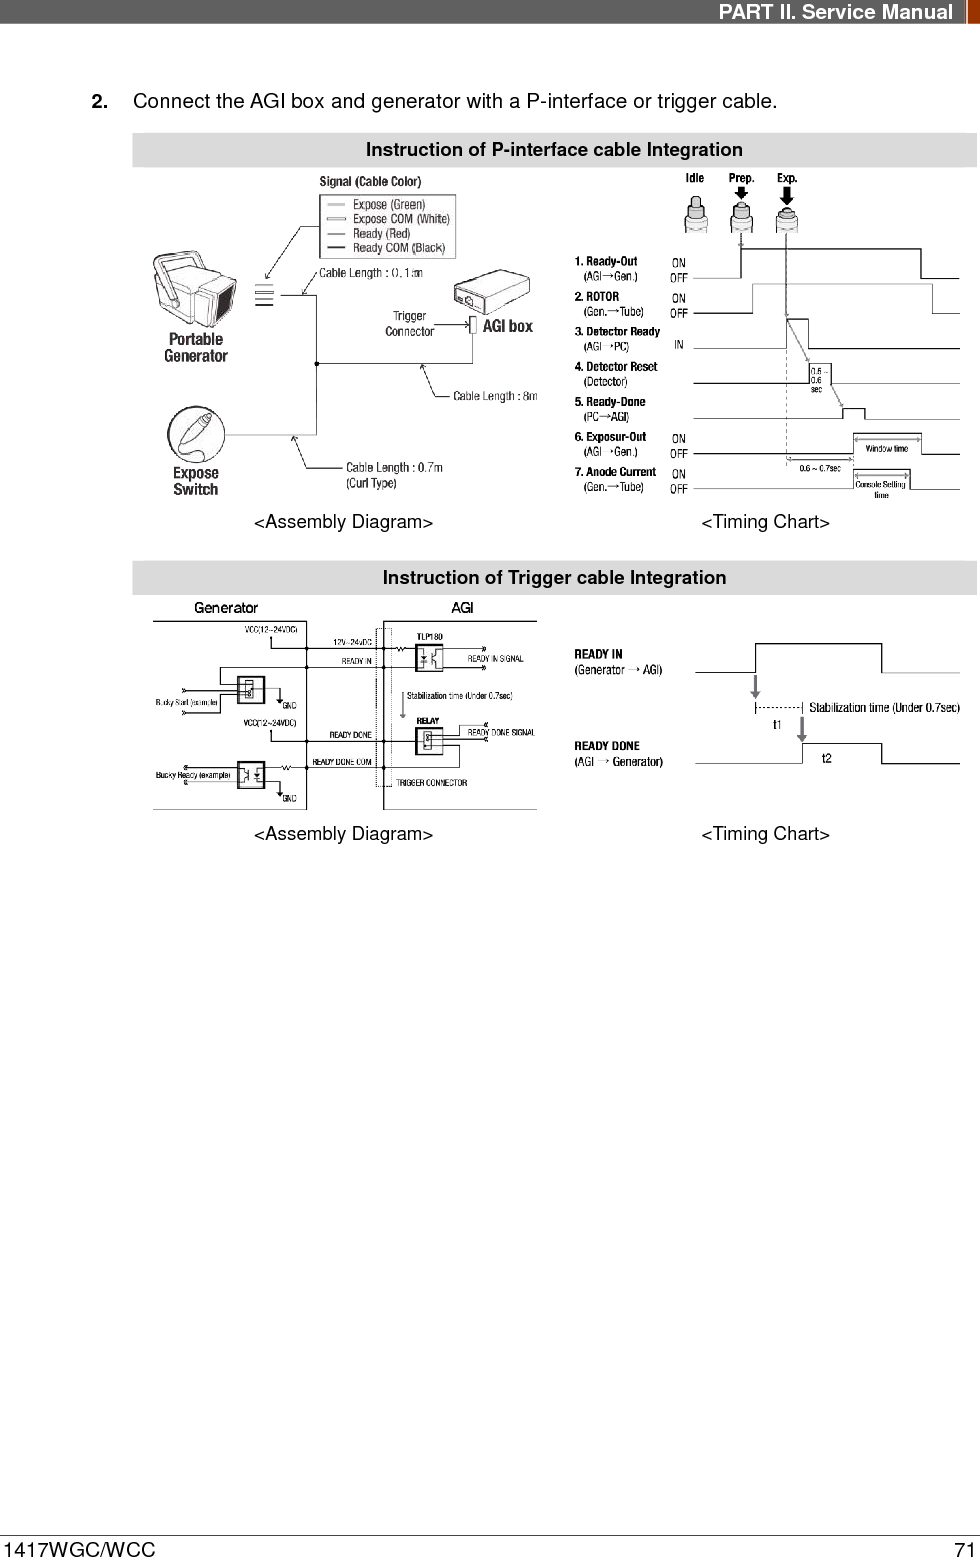 PART II. Service Manual  1417WGC/WCC 71 2. Connect the AGI box and generator with a P-interface or trigger cable. Instruction of P-interface cable Integration   &lt;Assembly Diagram&gt; &lt;Timing Chart&gt;  Instruction of Trigger cable Integration   &lt;Assembly Diagram&gt; &lt;Timing Chart&gt;    